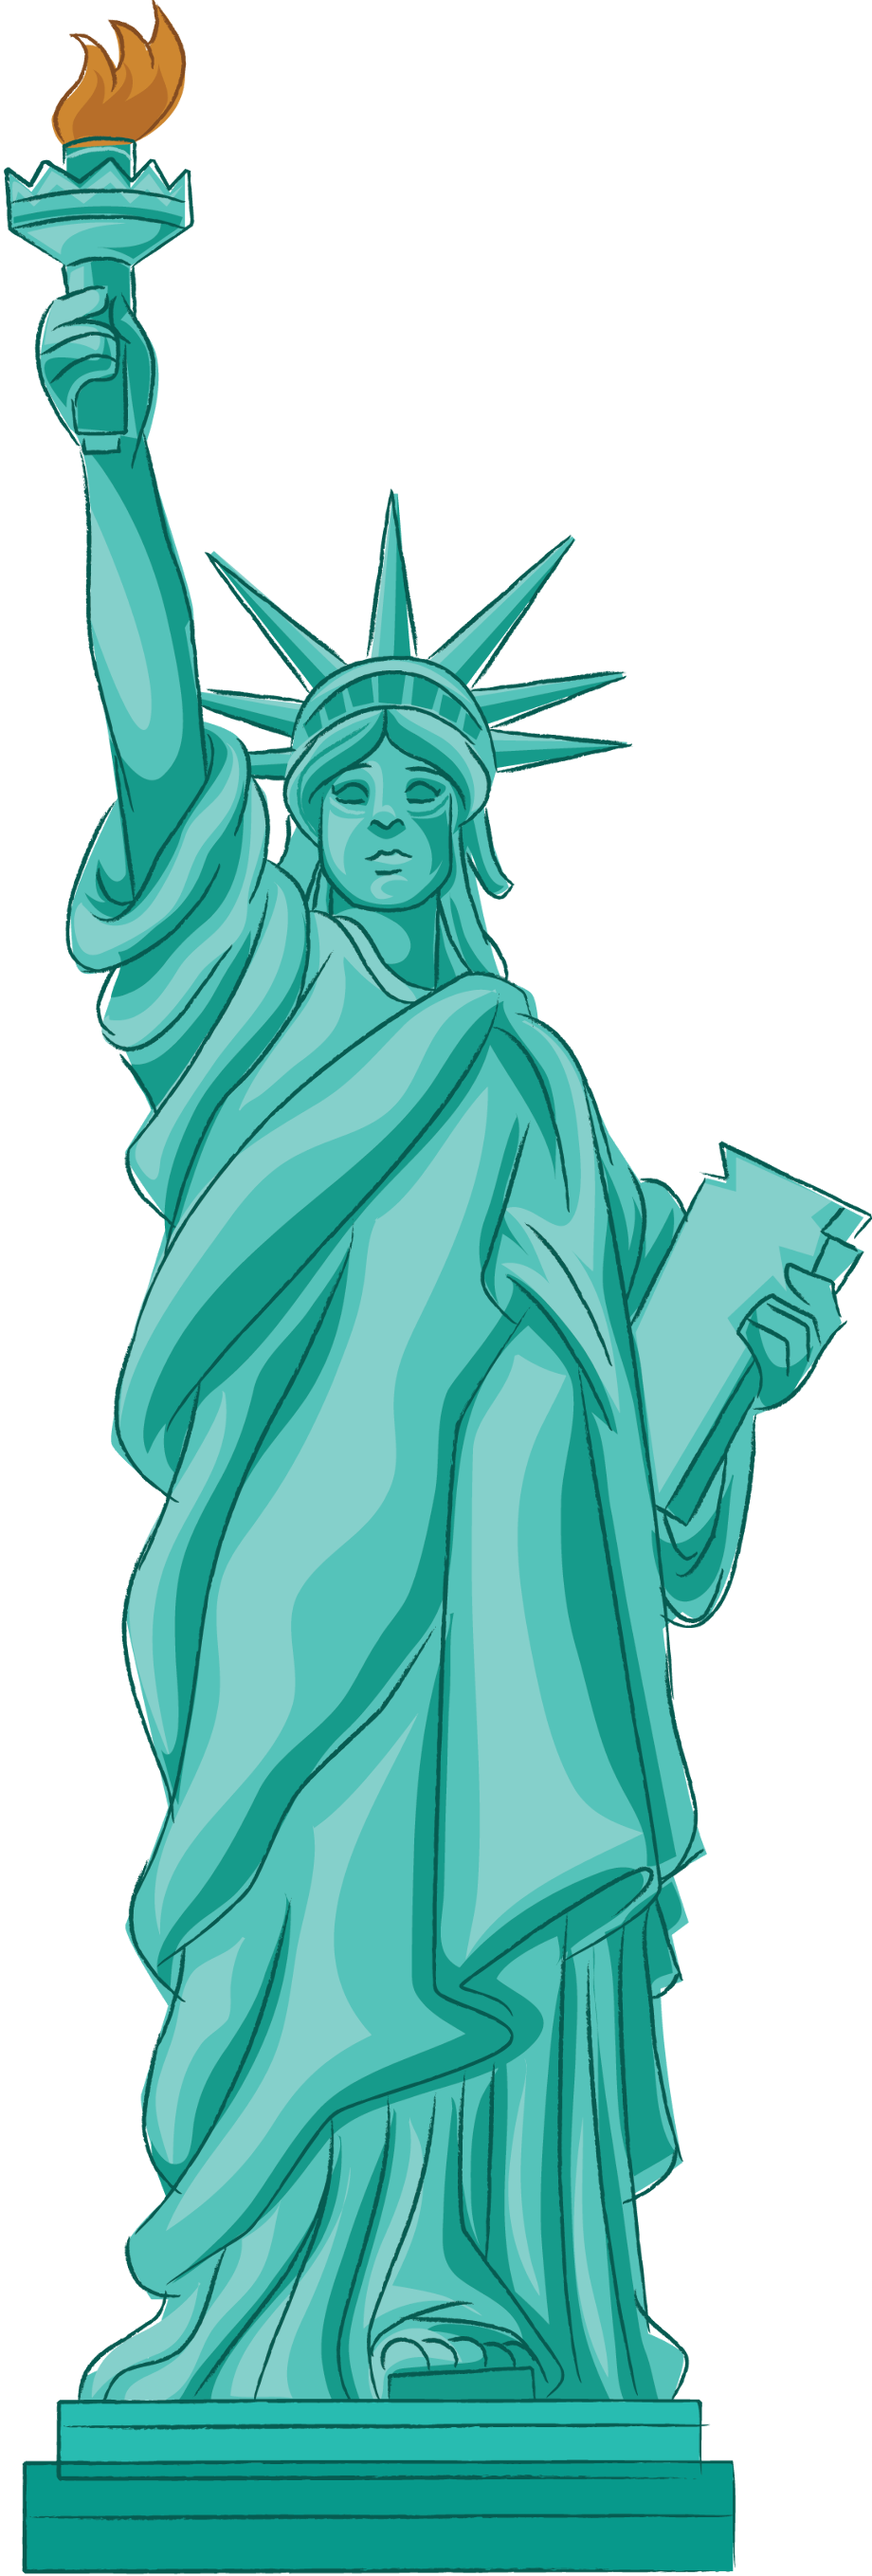 Download High Quality statue of liberty clipart graphic Transparent PNG ...